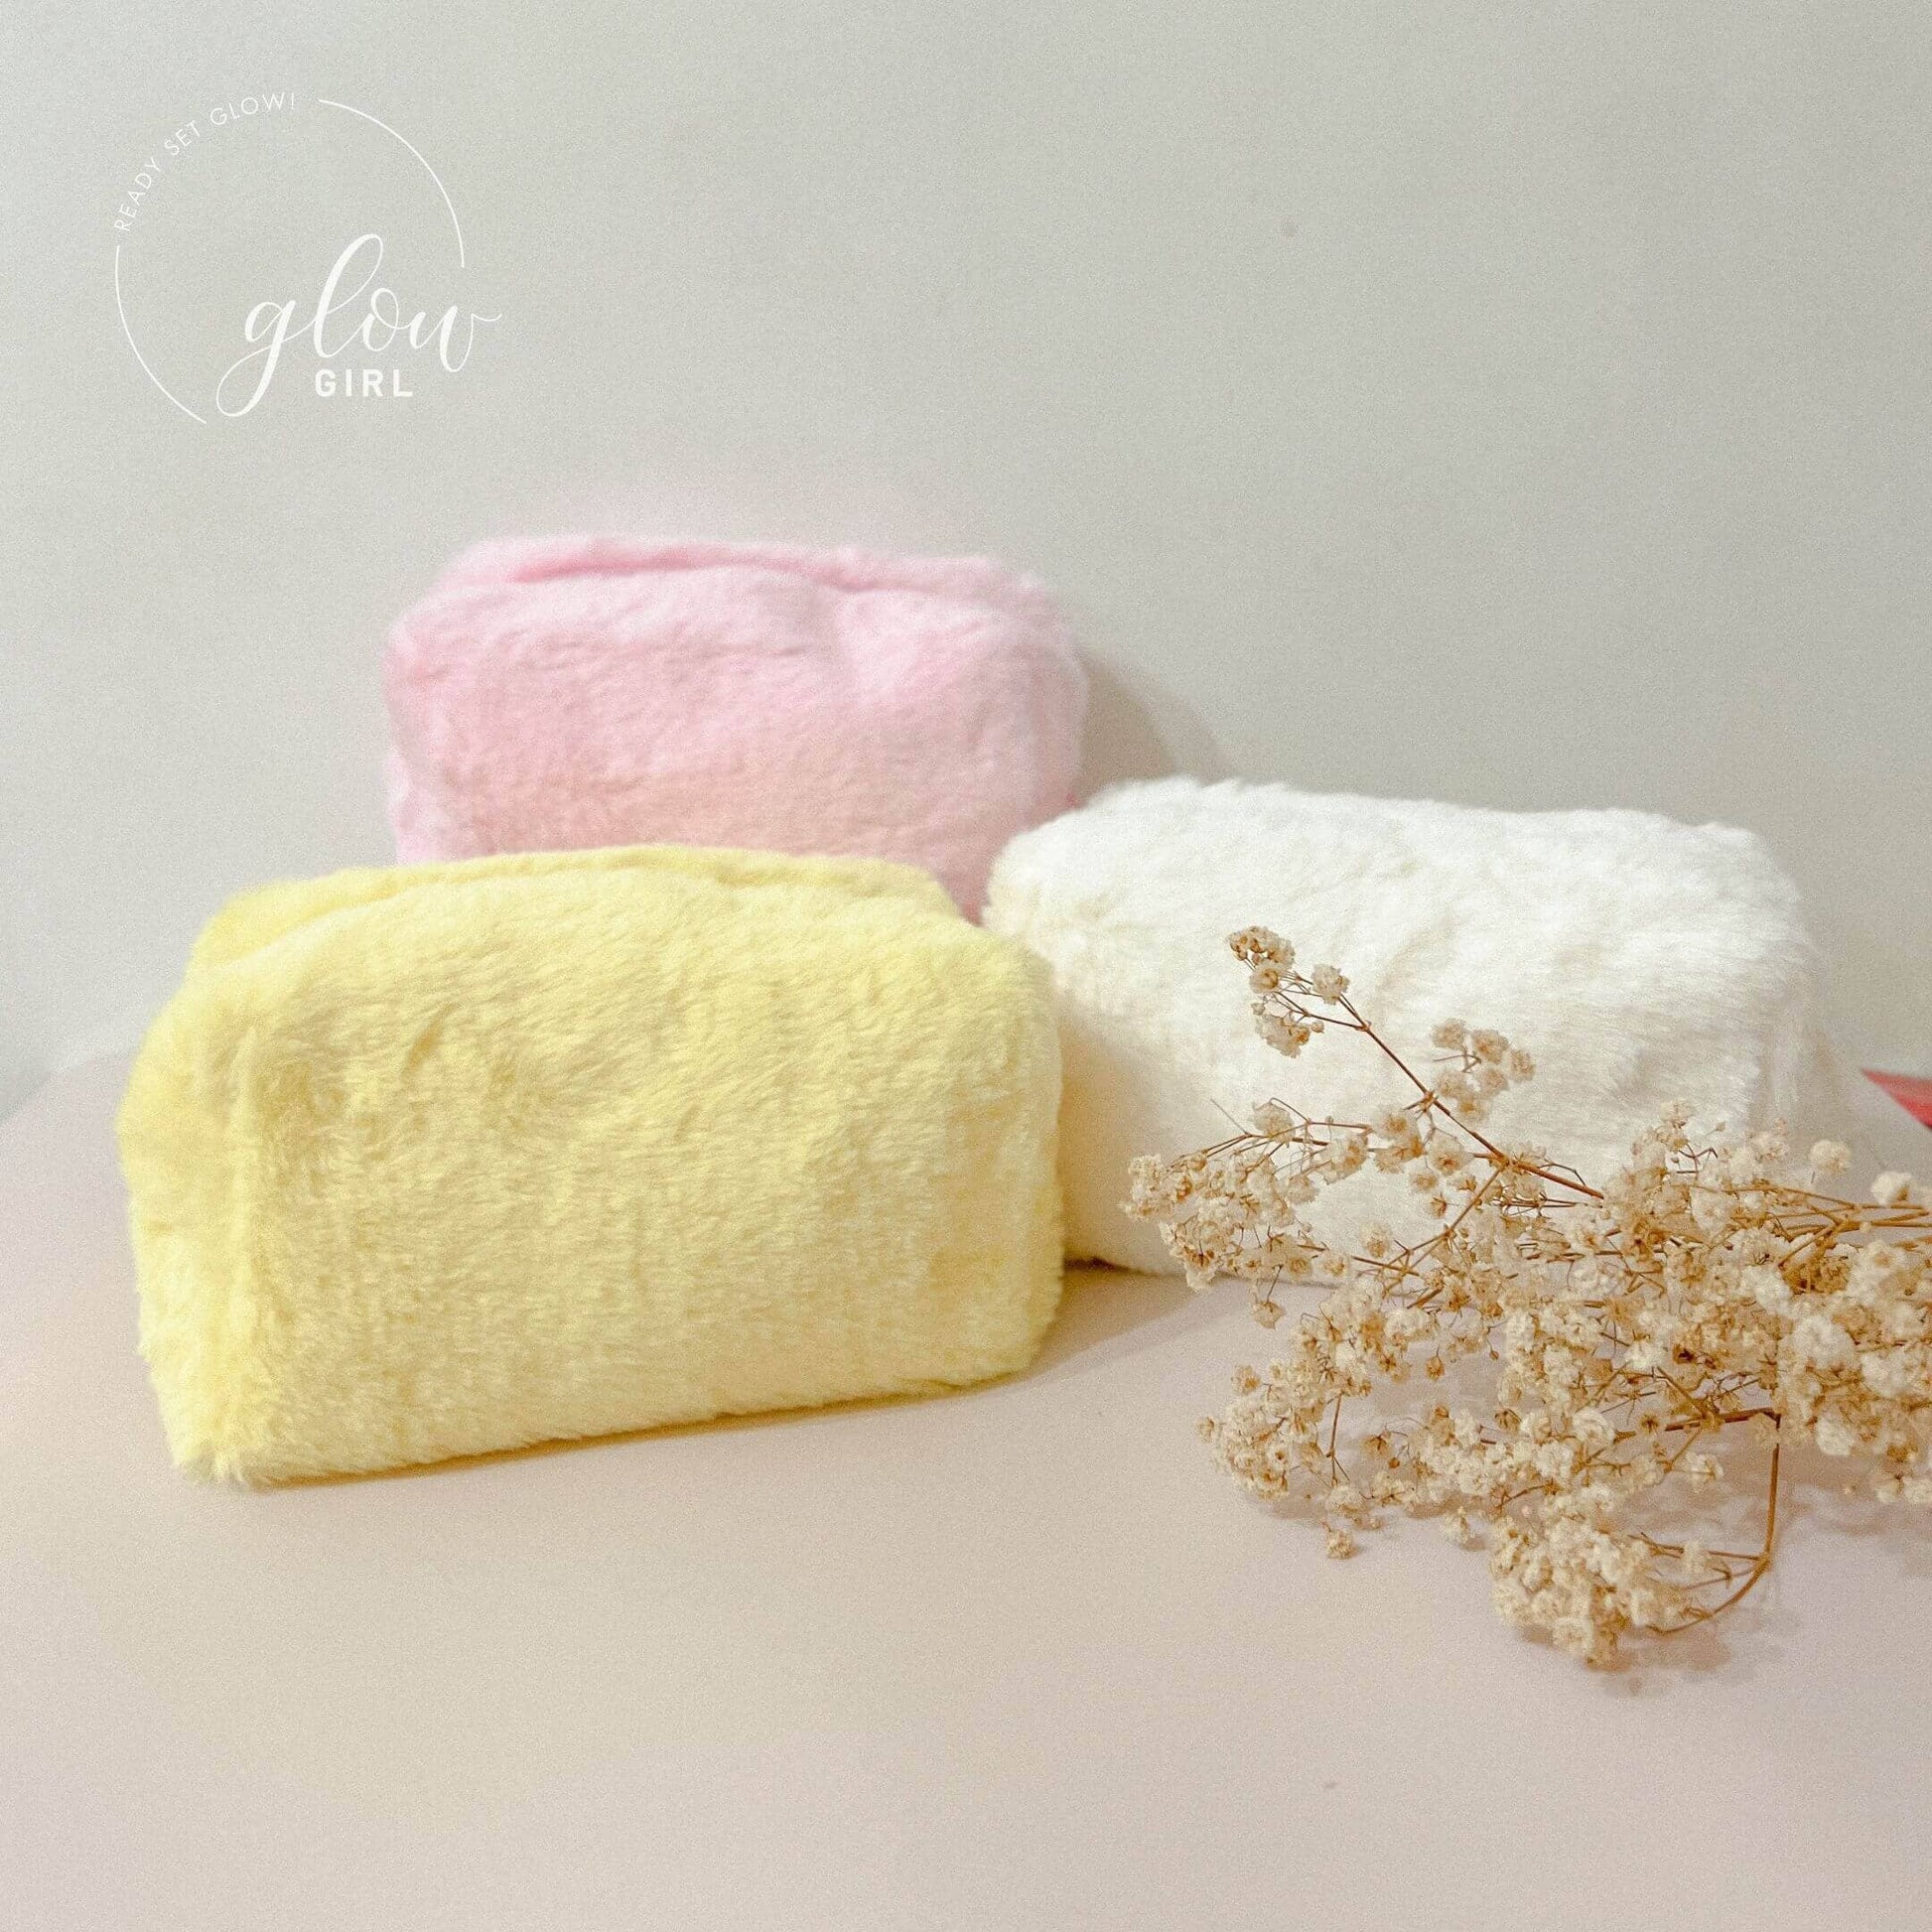 Fuzzy - Compact Vanity Pouch Glow Girl MNL 